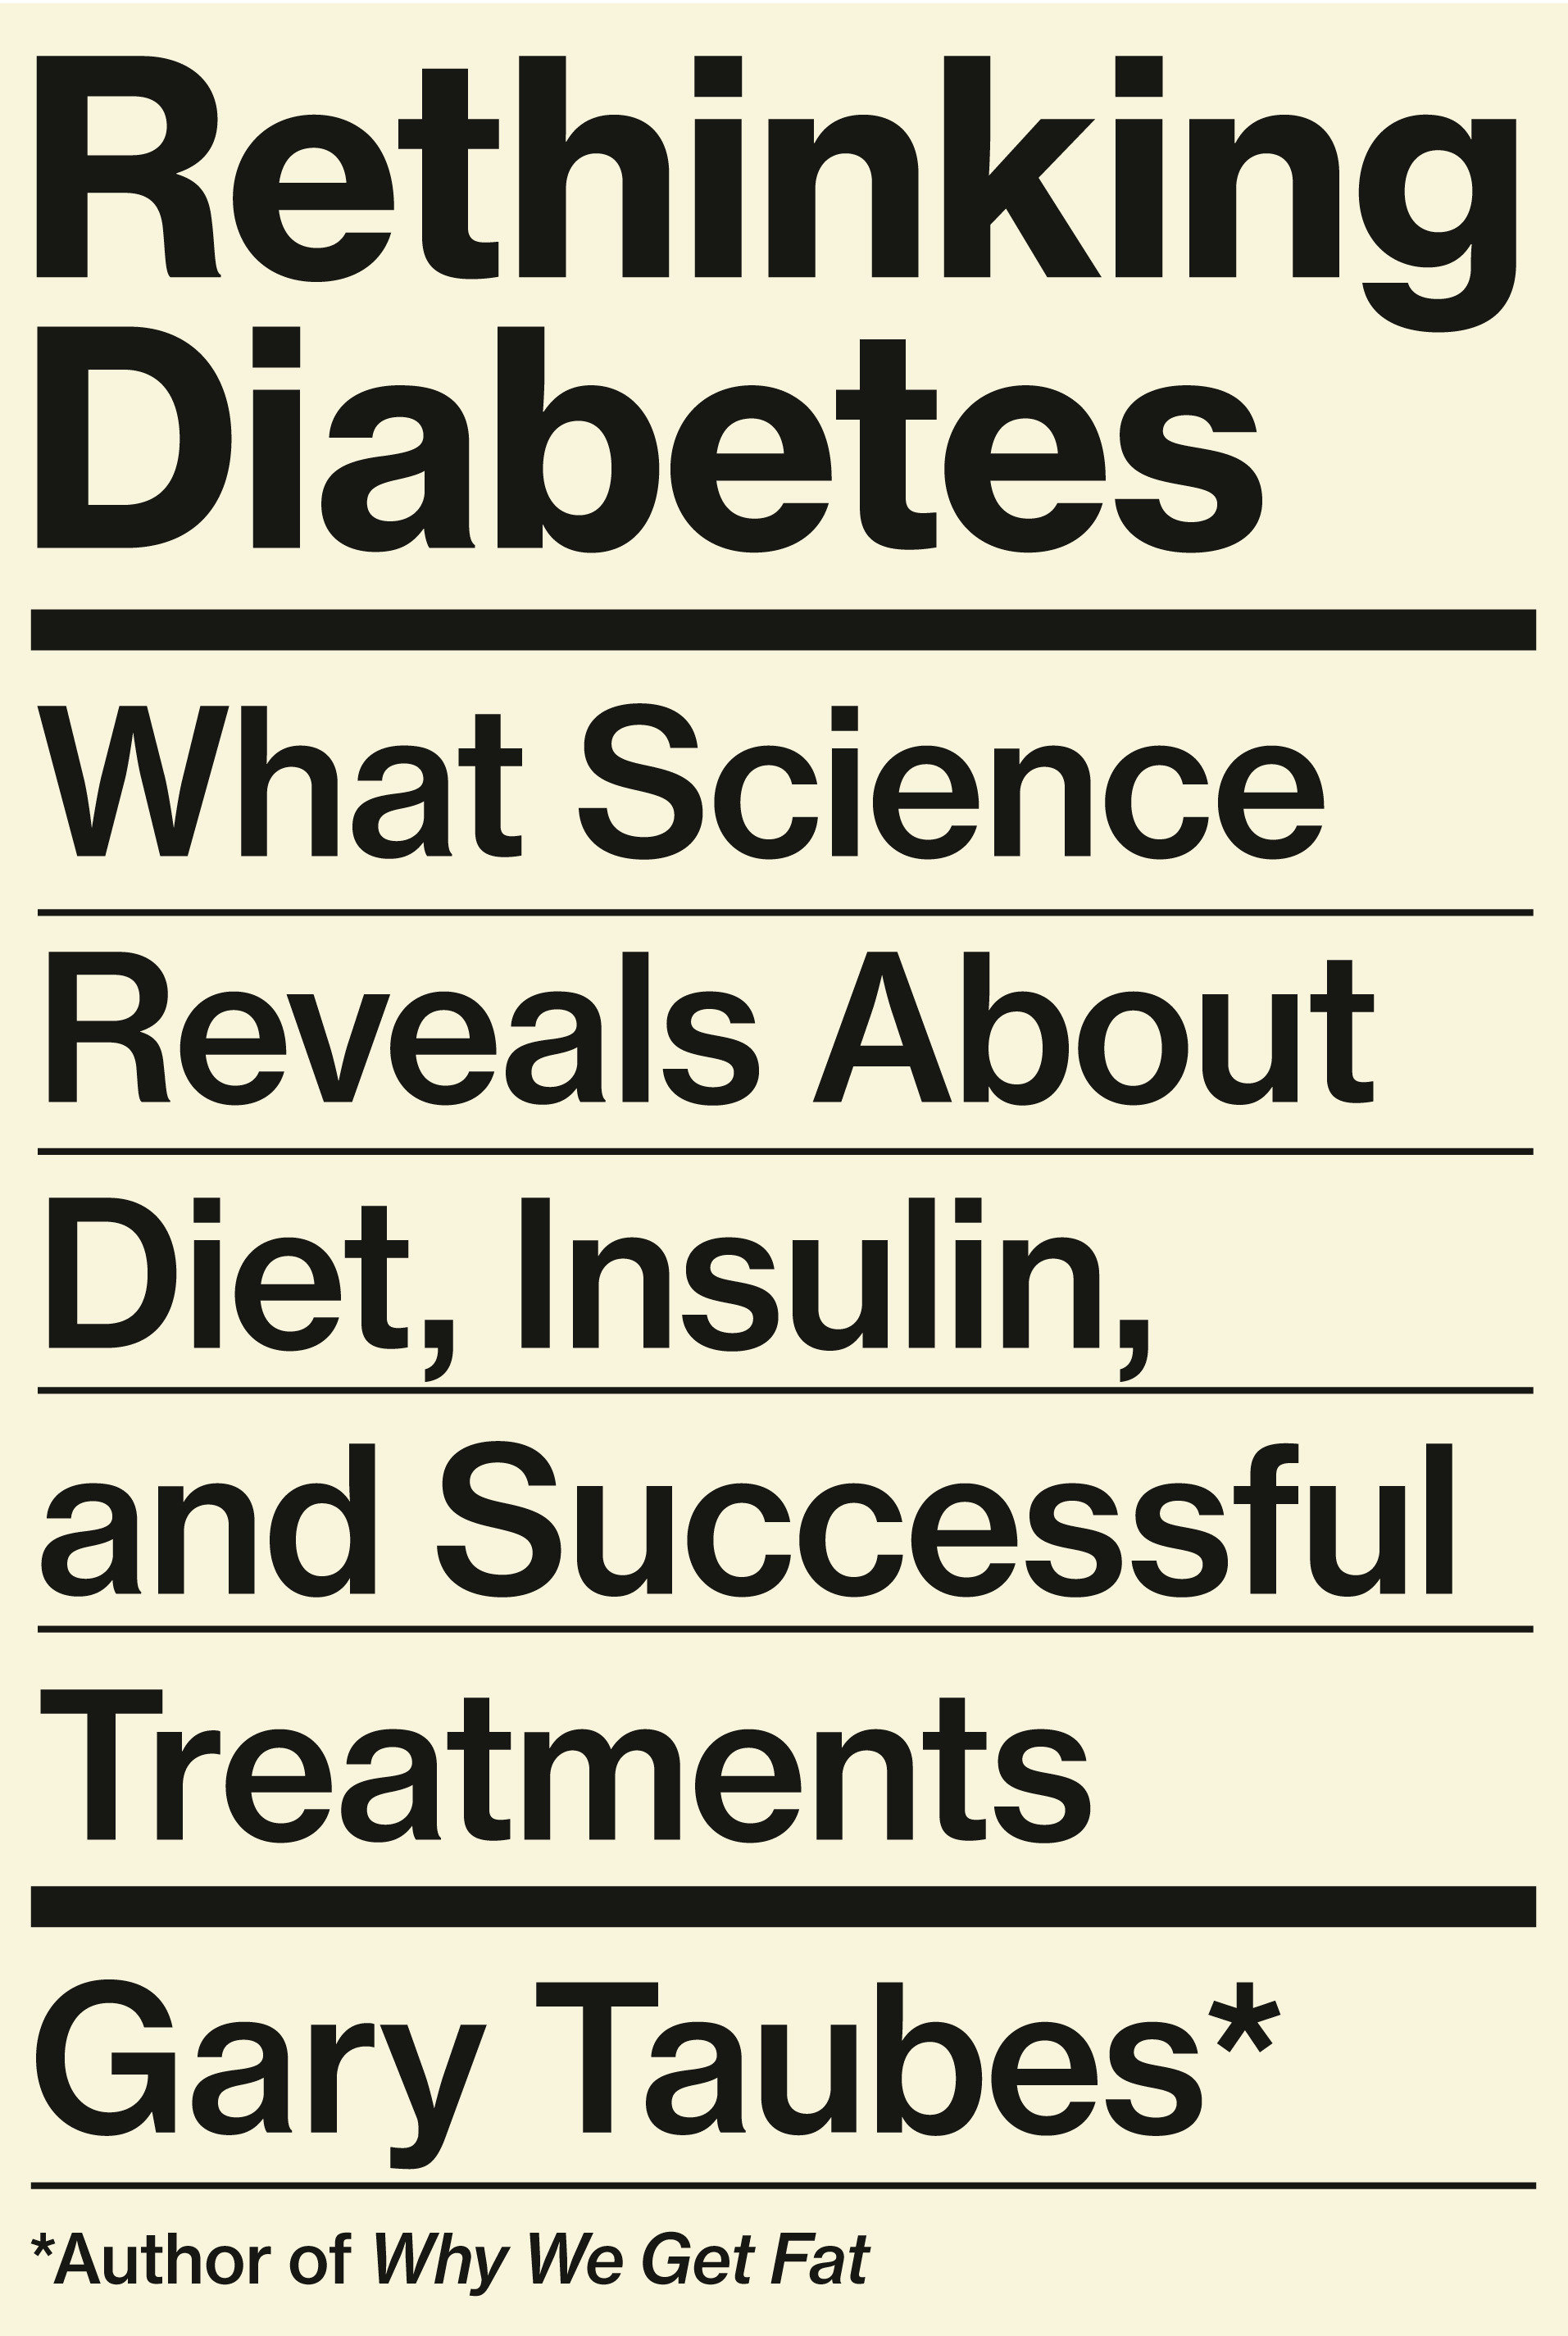 Rethinking Diabetes What Science Reveals About Diet, Insulin, and Successful Treatments cover image